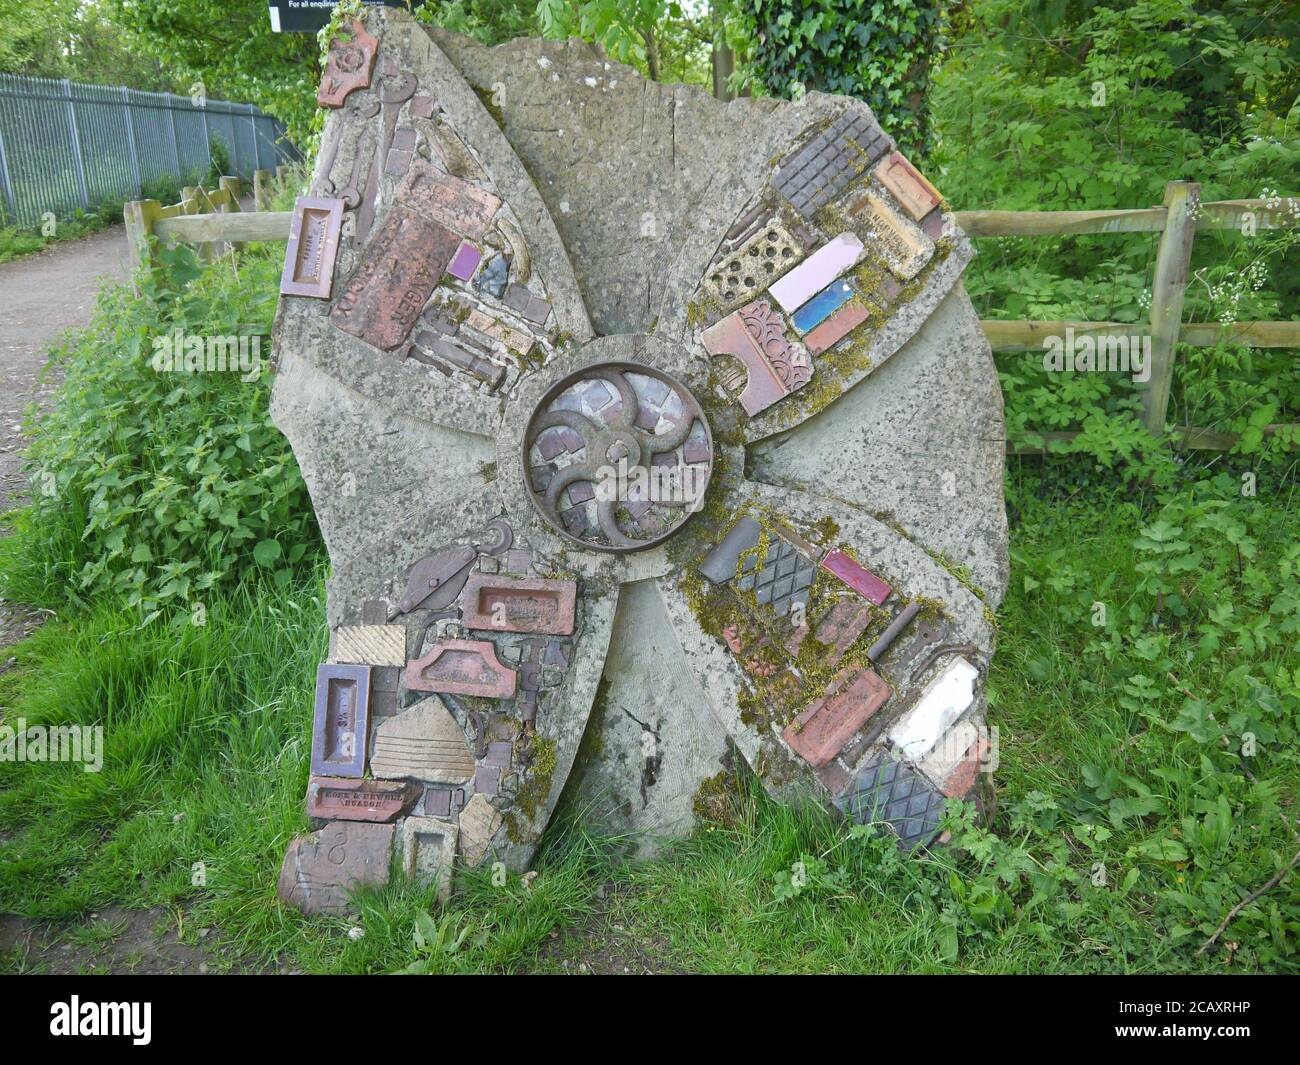 Outdoor Sculpture Made From Recycled Materials Stock Photo